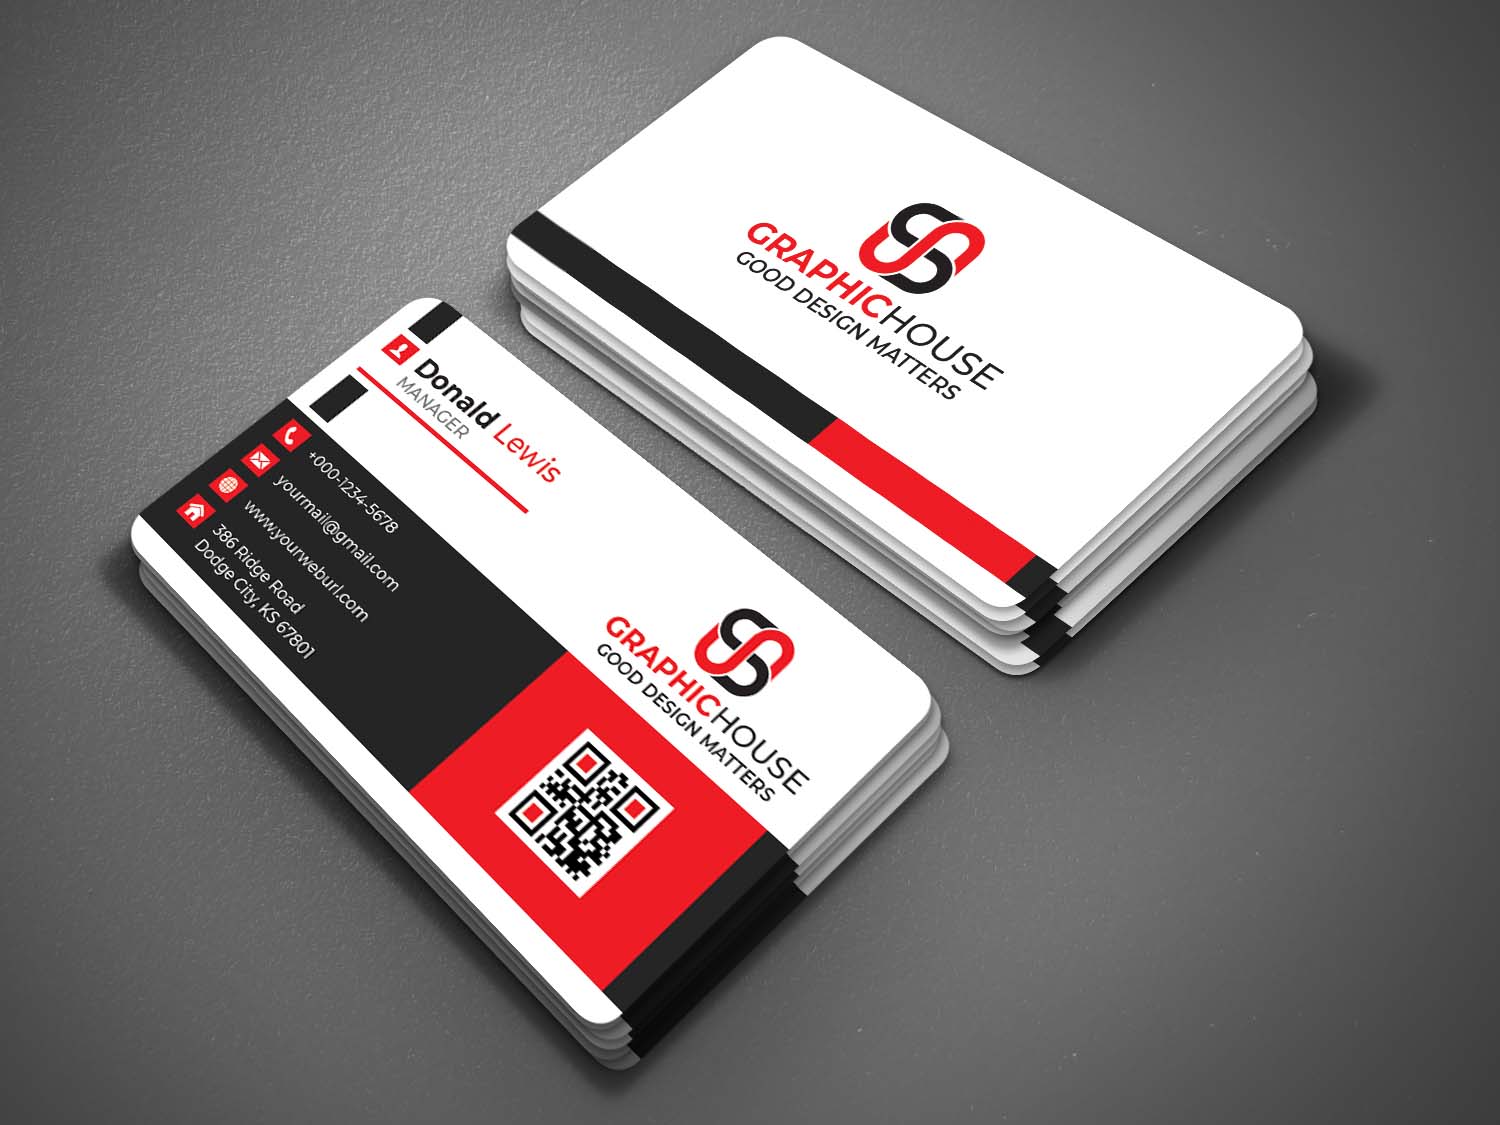 Stylish And Professional Business Card Template Example.